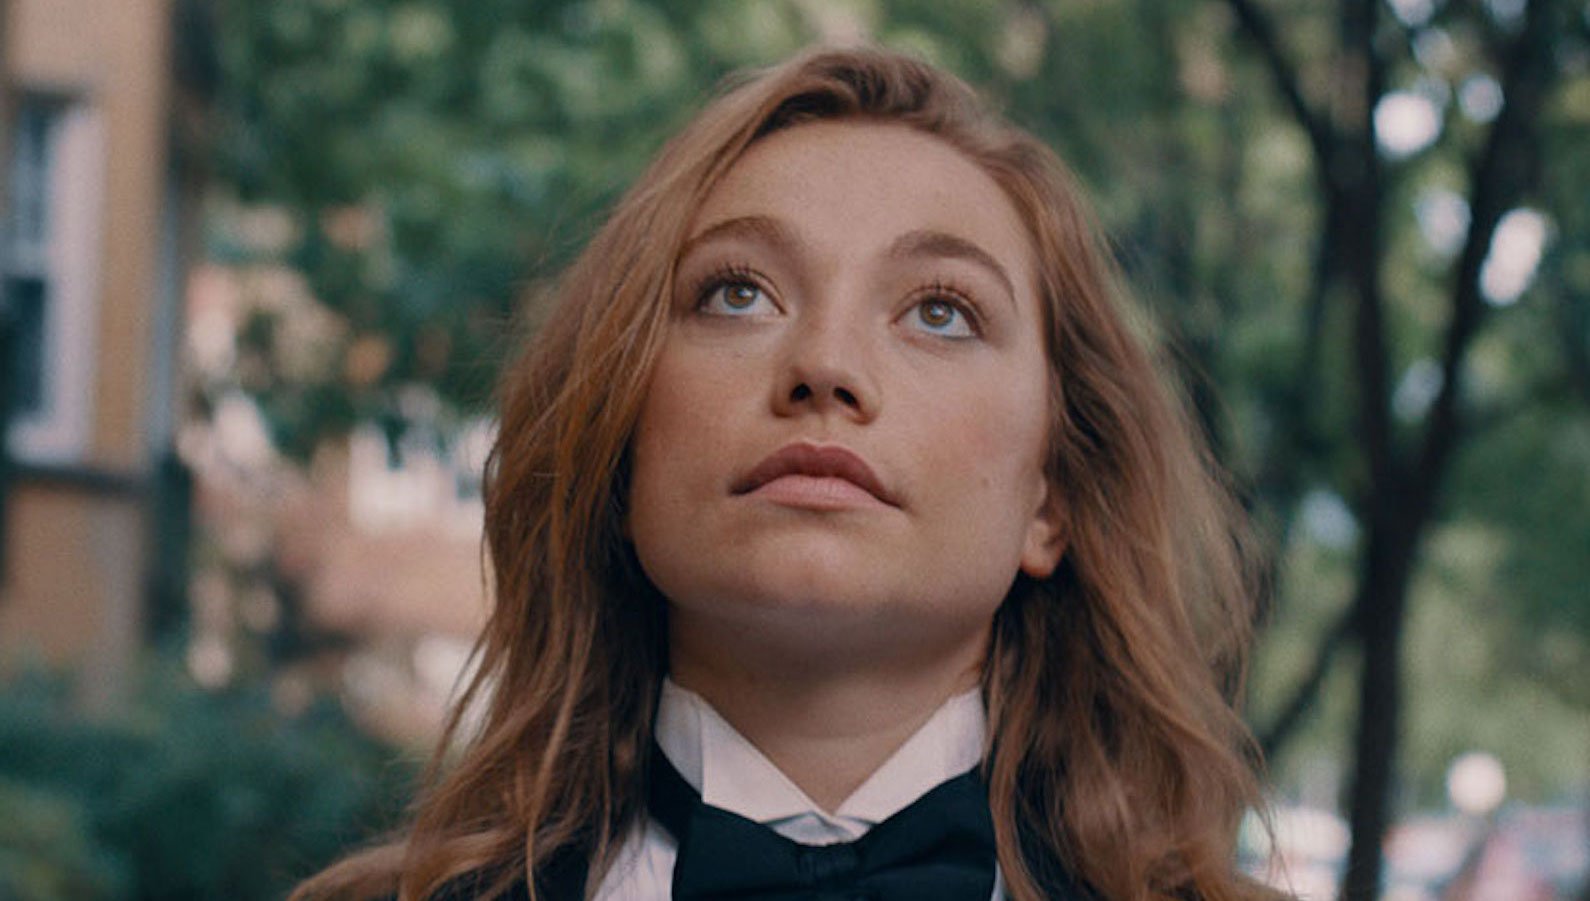 A girl with long red hair and wearing a tuxedo looks up